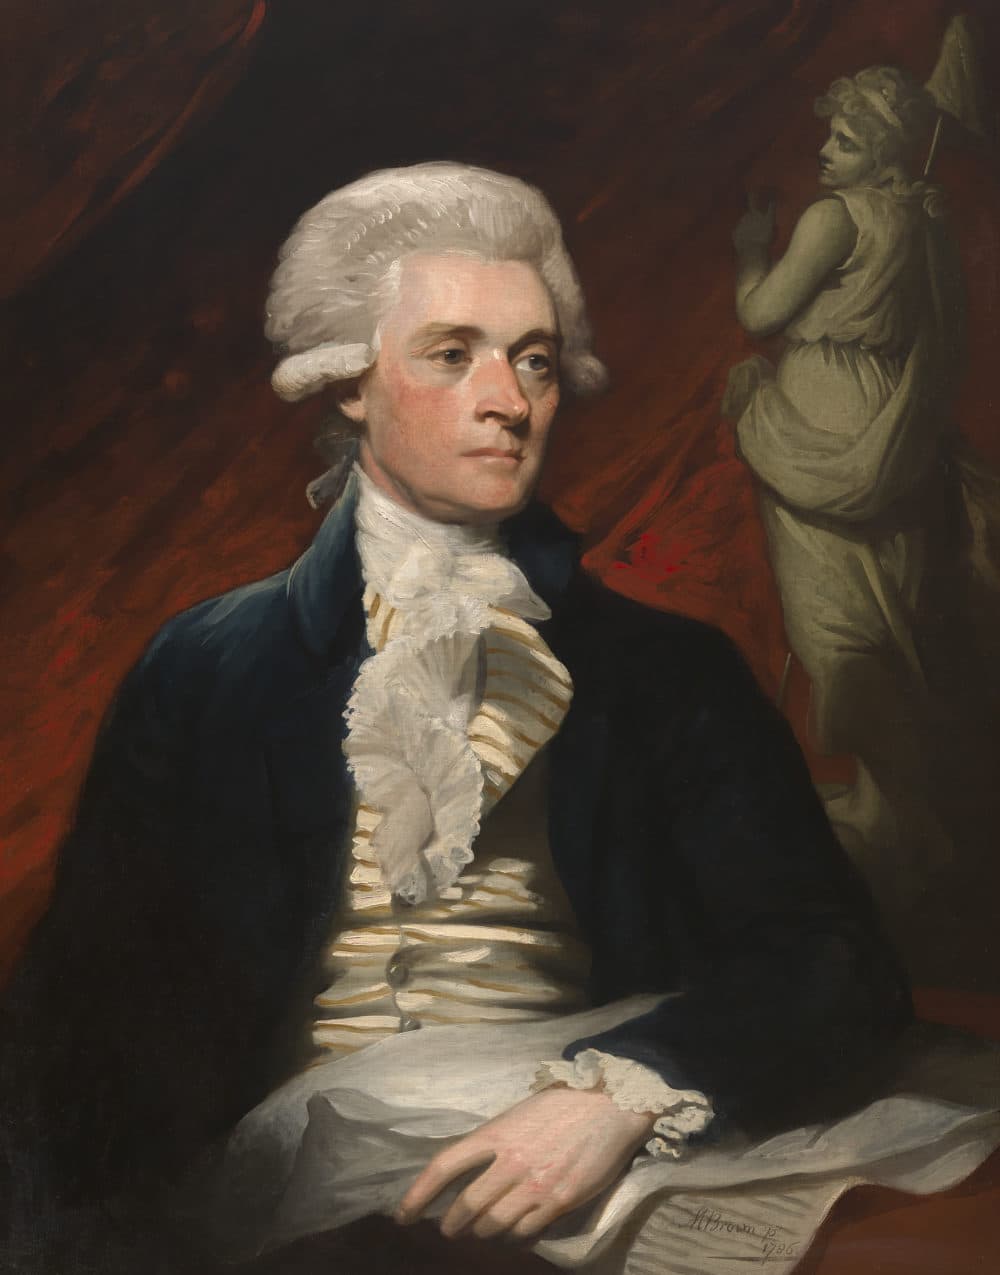 Mather Brown's oil on canvas painting of Thomas Jefferson in 1786. (Courtesy of Chrysler Museum of Art)